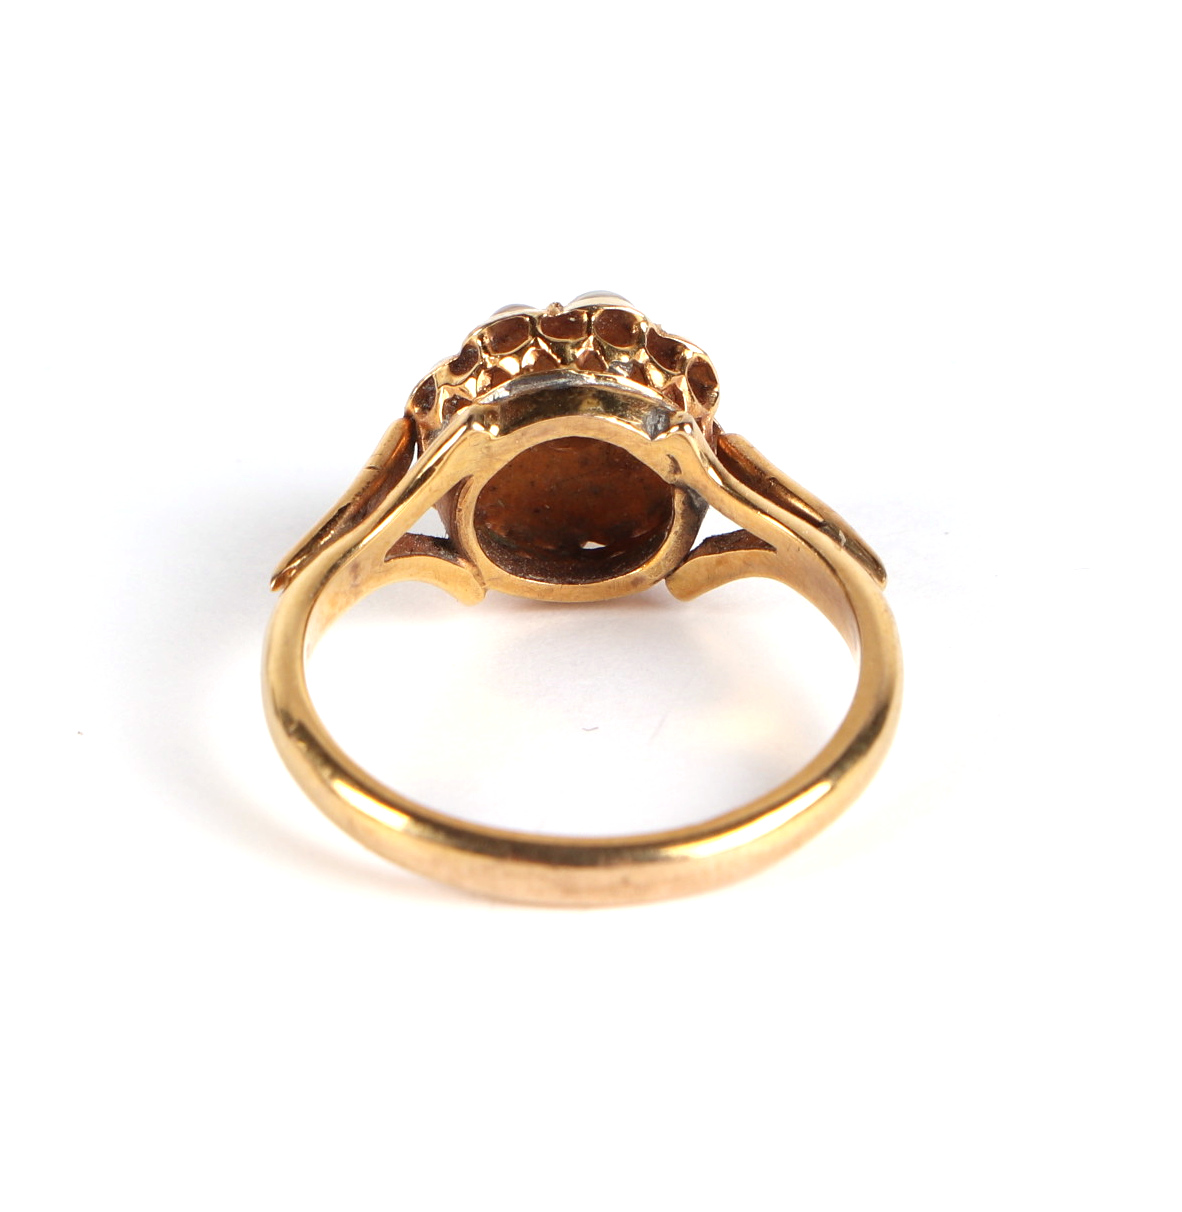 An antique 9ct gold seed pearl and diamond ring, 2.9g, approx. UK size L - Image 4 of 5